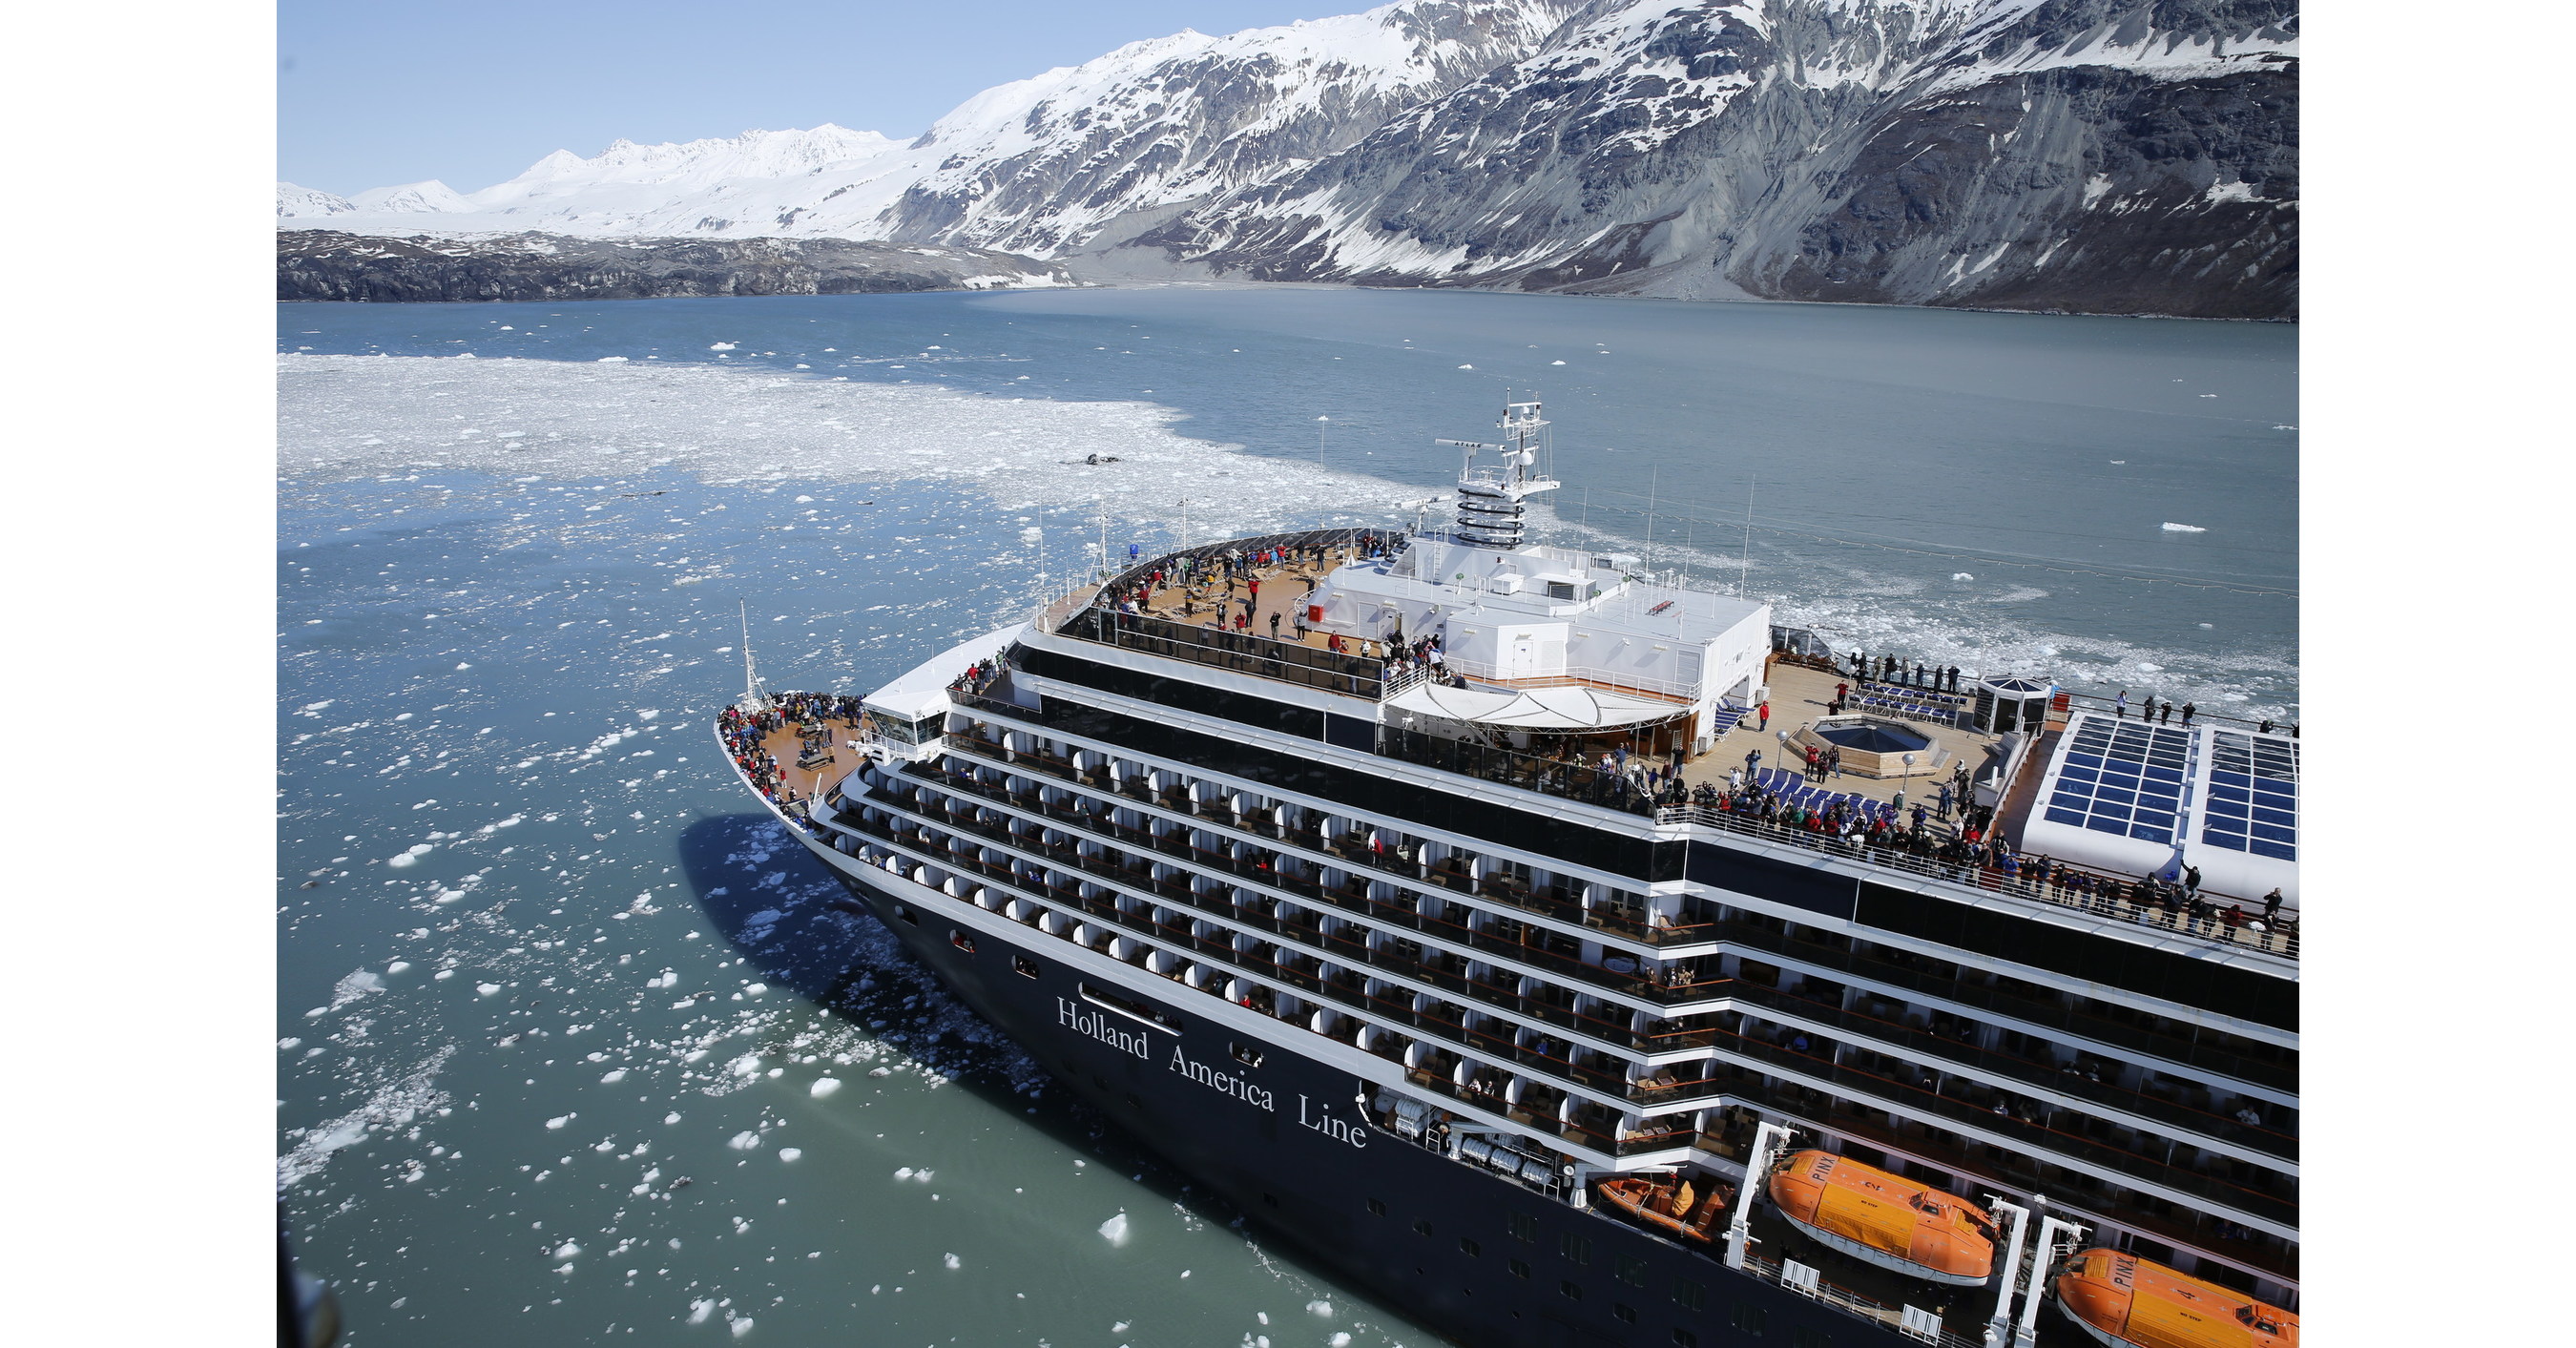 Growing Interest in Alaska 2023 as Holland America Line’s 75th Anniversary Season in the Great Land Comes to an End